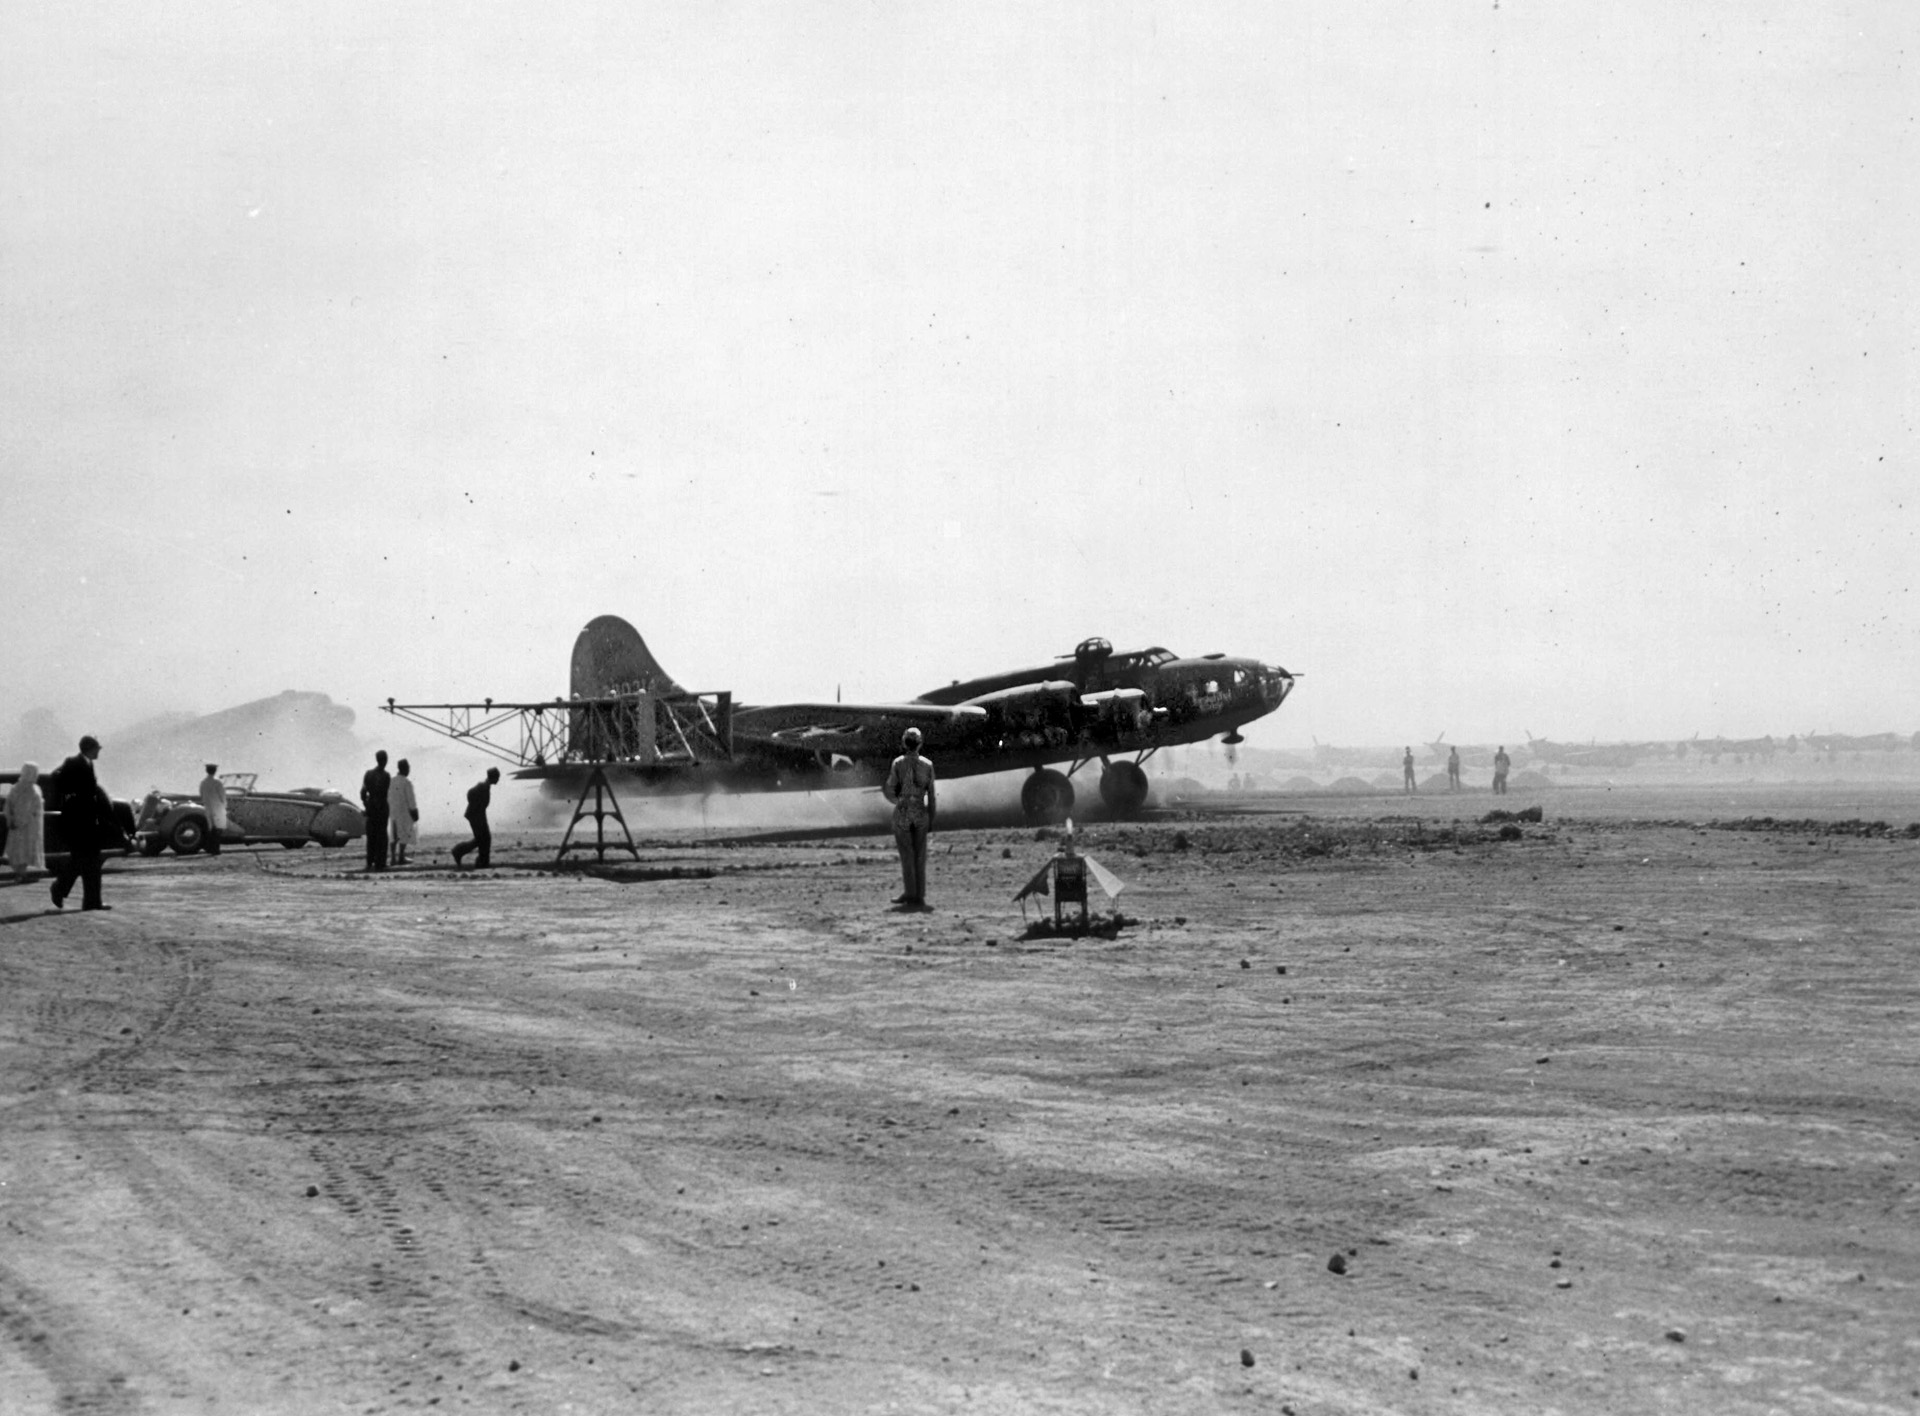  A B-17 from an unidentified squadron raises a cloud of dust as it prepares to take off from an airfield in North Africa on a bomb run over Italy, 1943. Lt. Perry and his crew arrived in North Africa in October 1943.